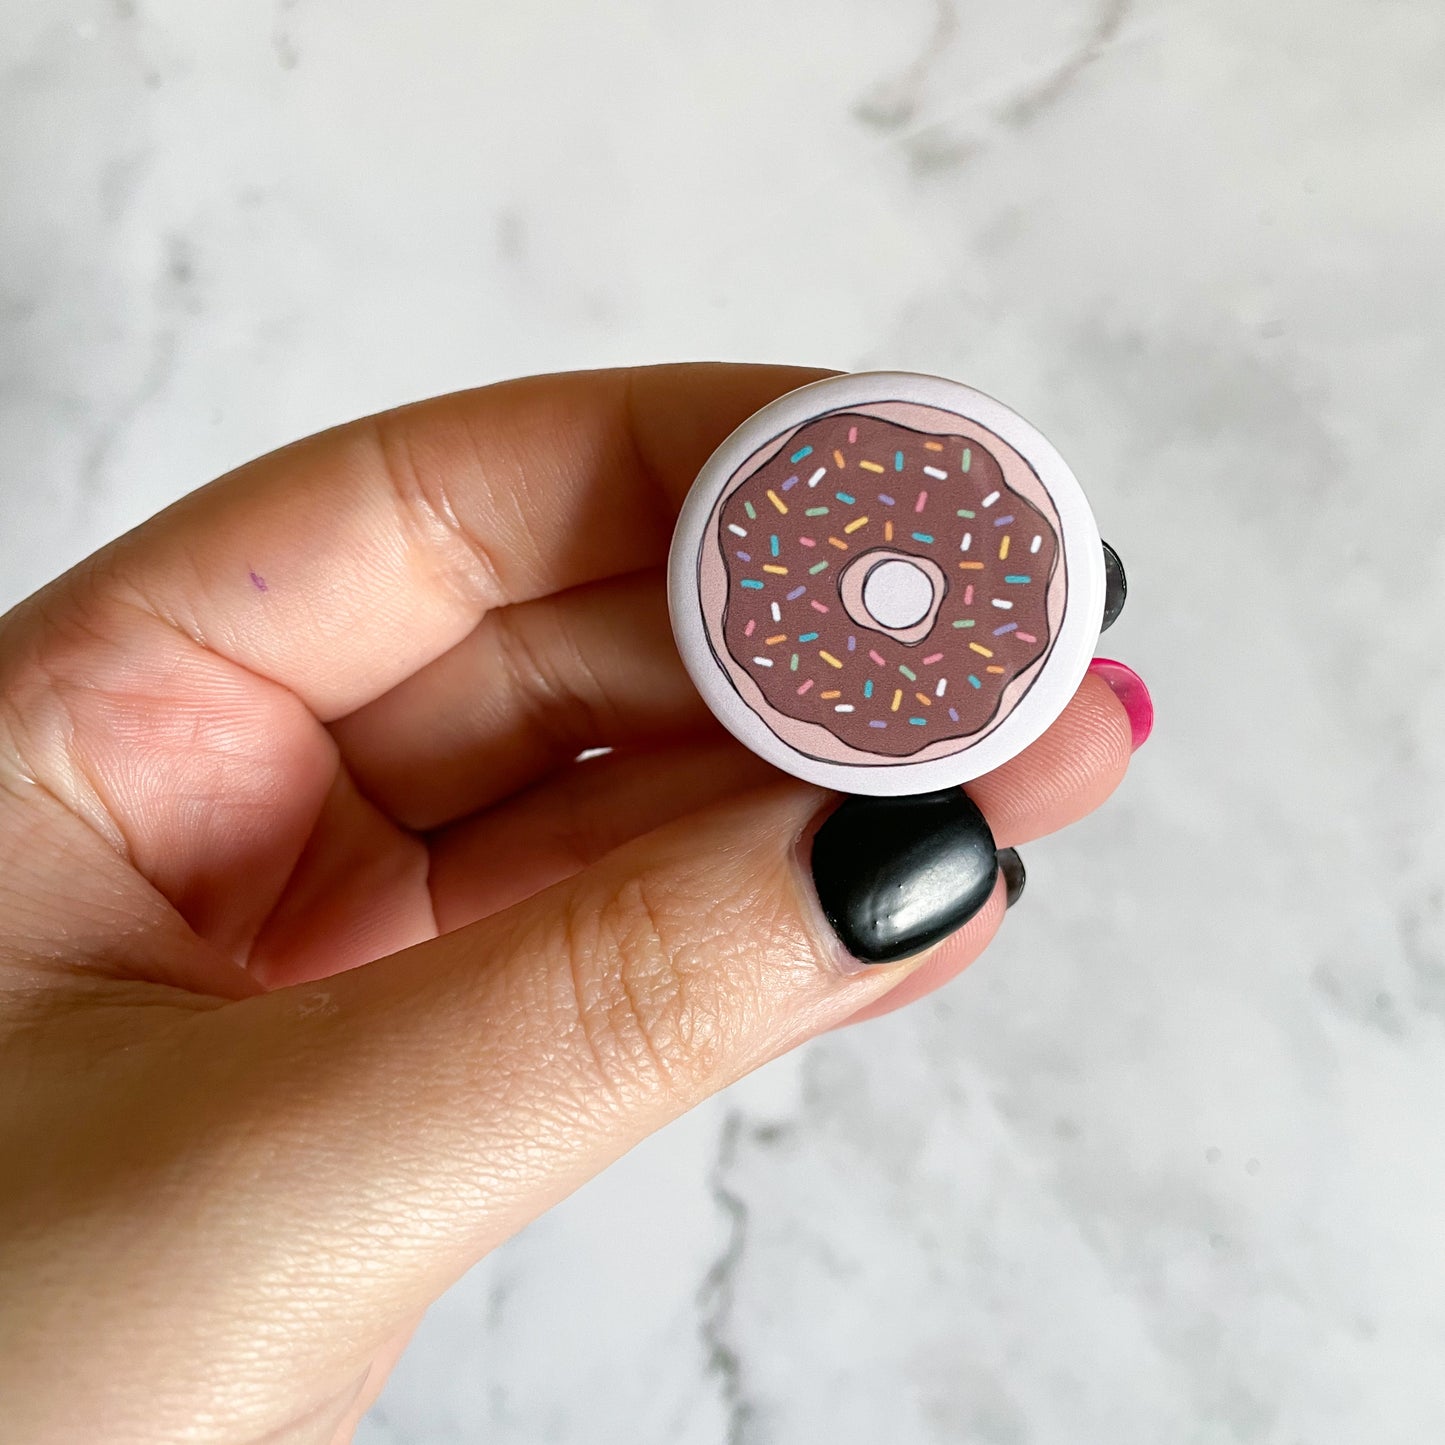 Chocolate Sprinkle Donut Button / Badge (Buy 4 Get 1 FREE)